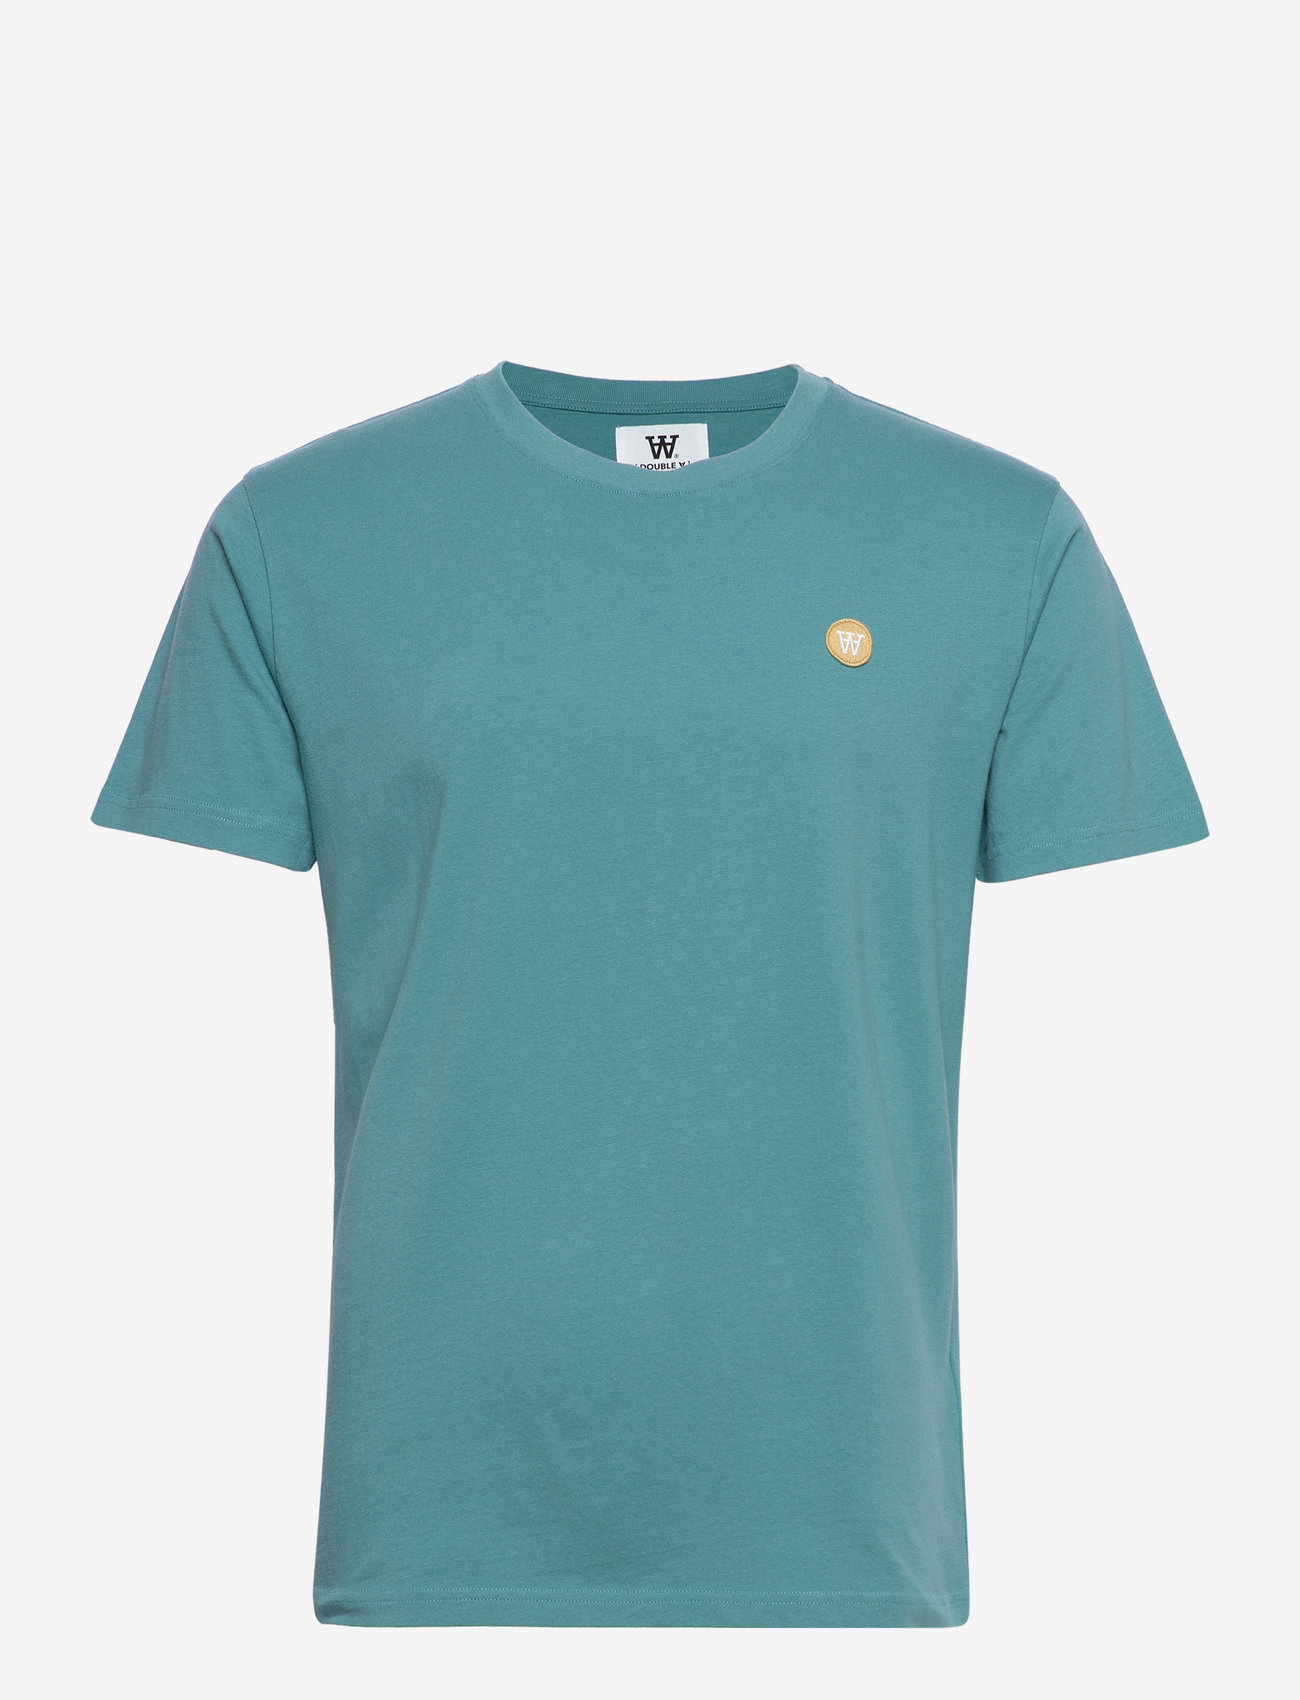 Double A by Wood Wood - Ace T-shirt - kortermede t-skjorter - teal - 0